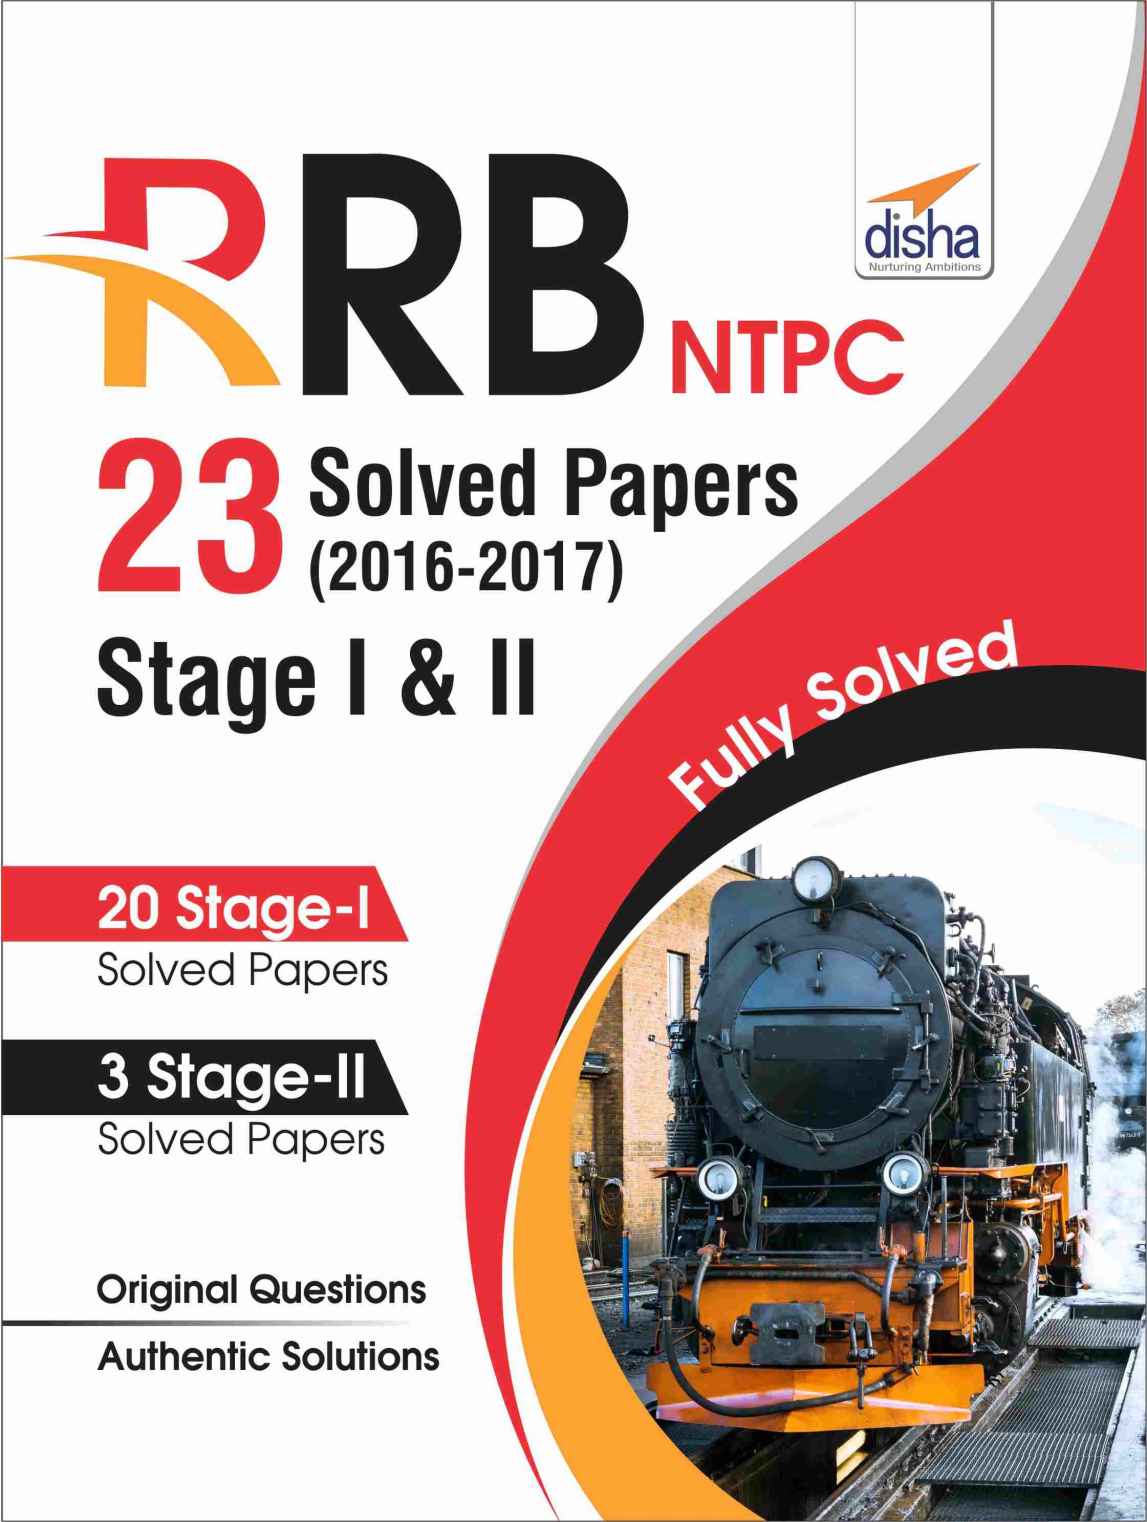 RRB NTPC 23 Solved Papers (2016 to 2017) Stage 1 & 2 PDF